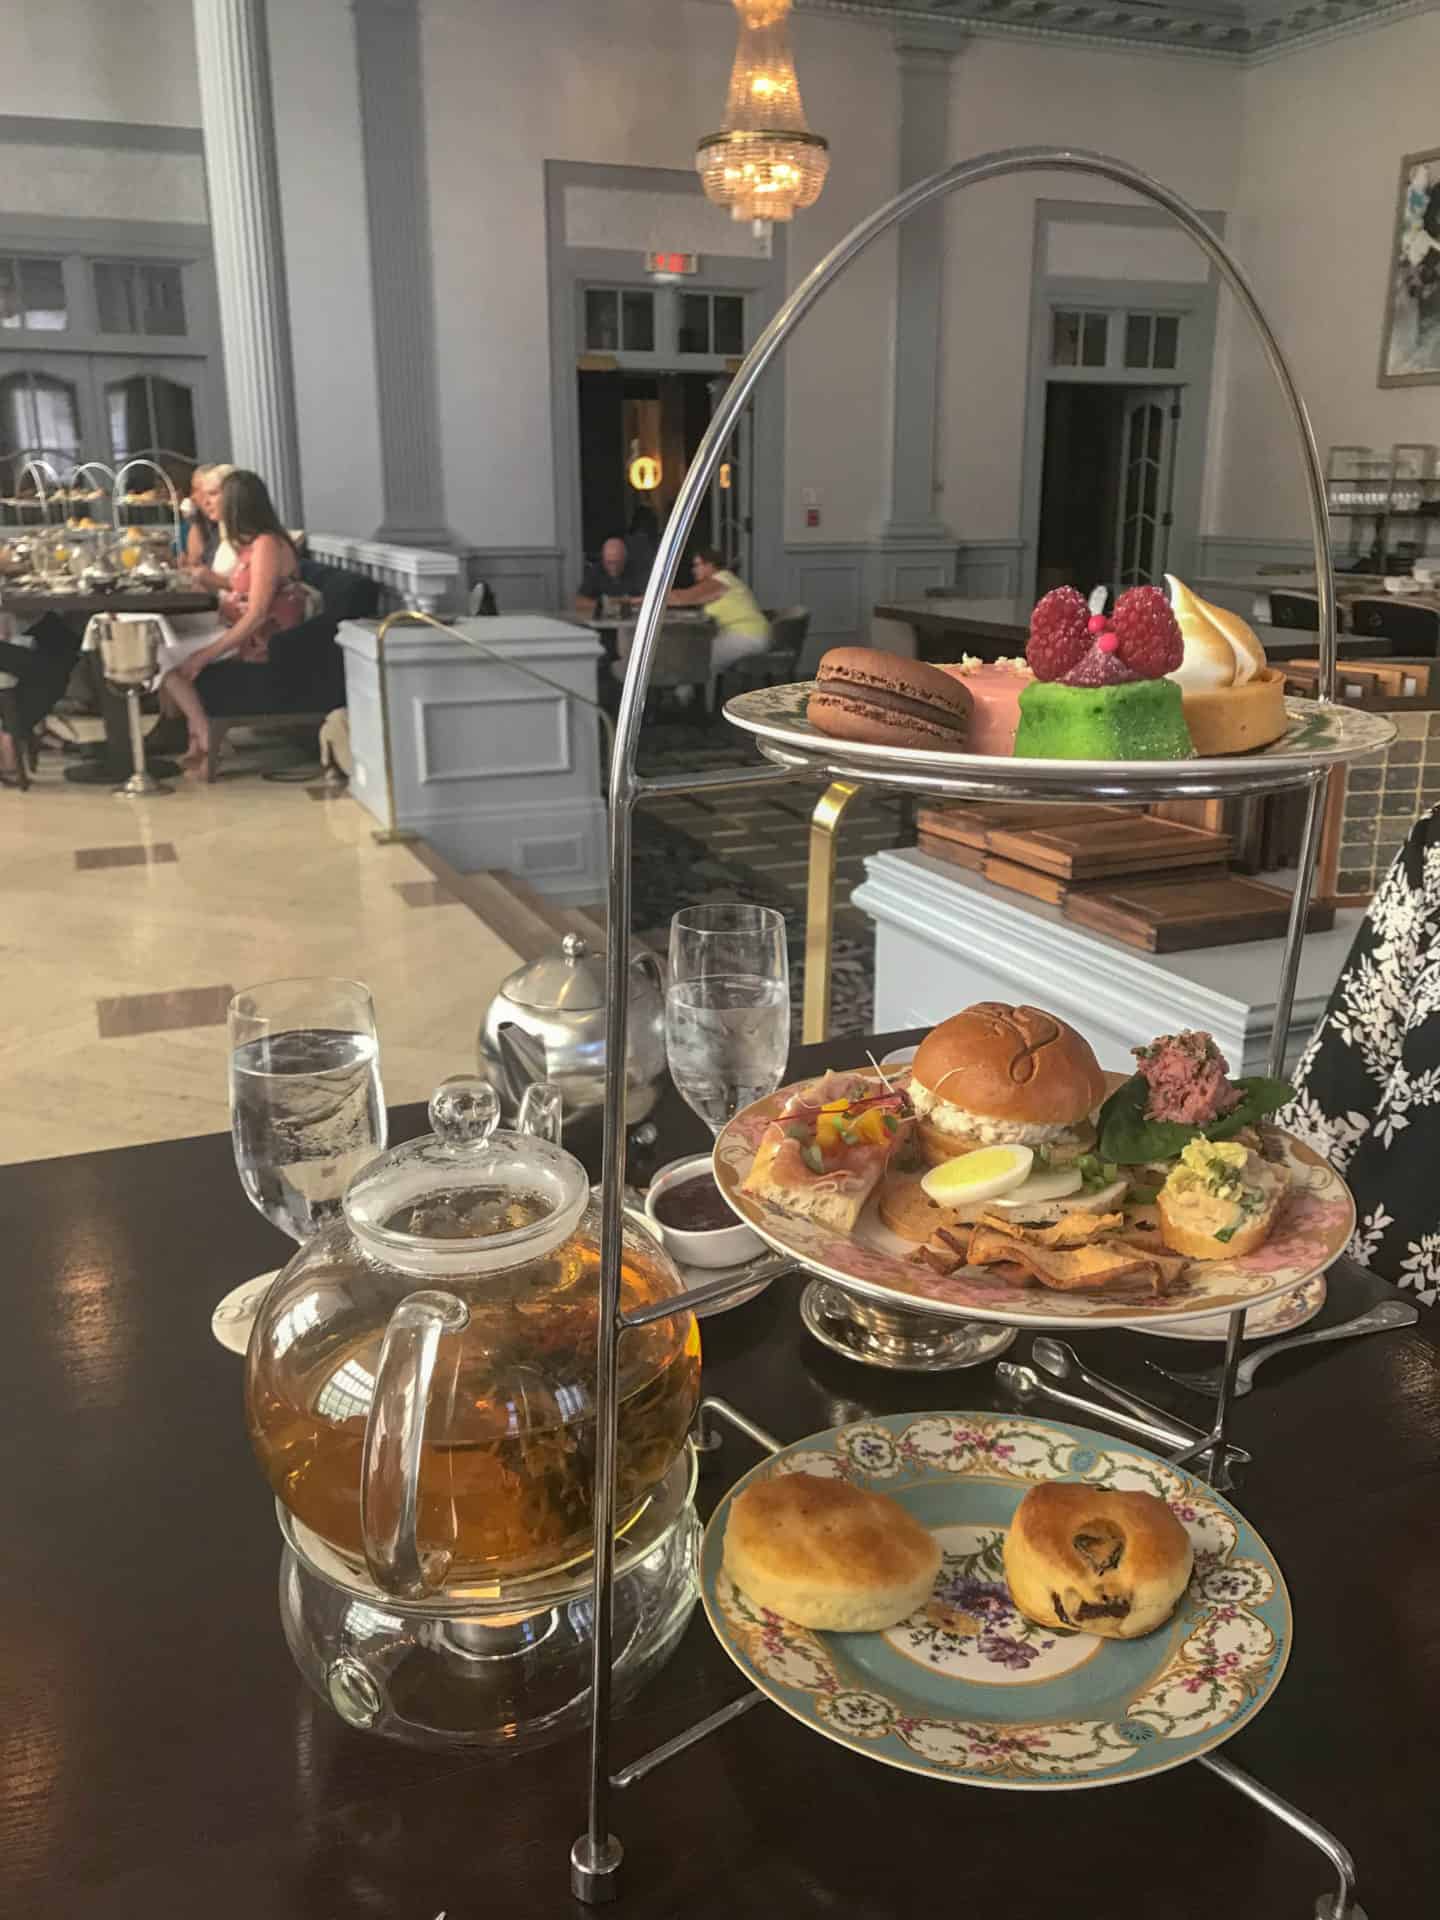 Partaking in high tea at the Chateau Laurier is one of the things to do in Ottawa